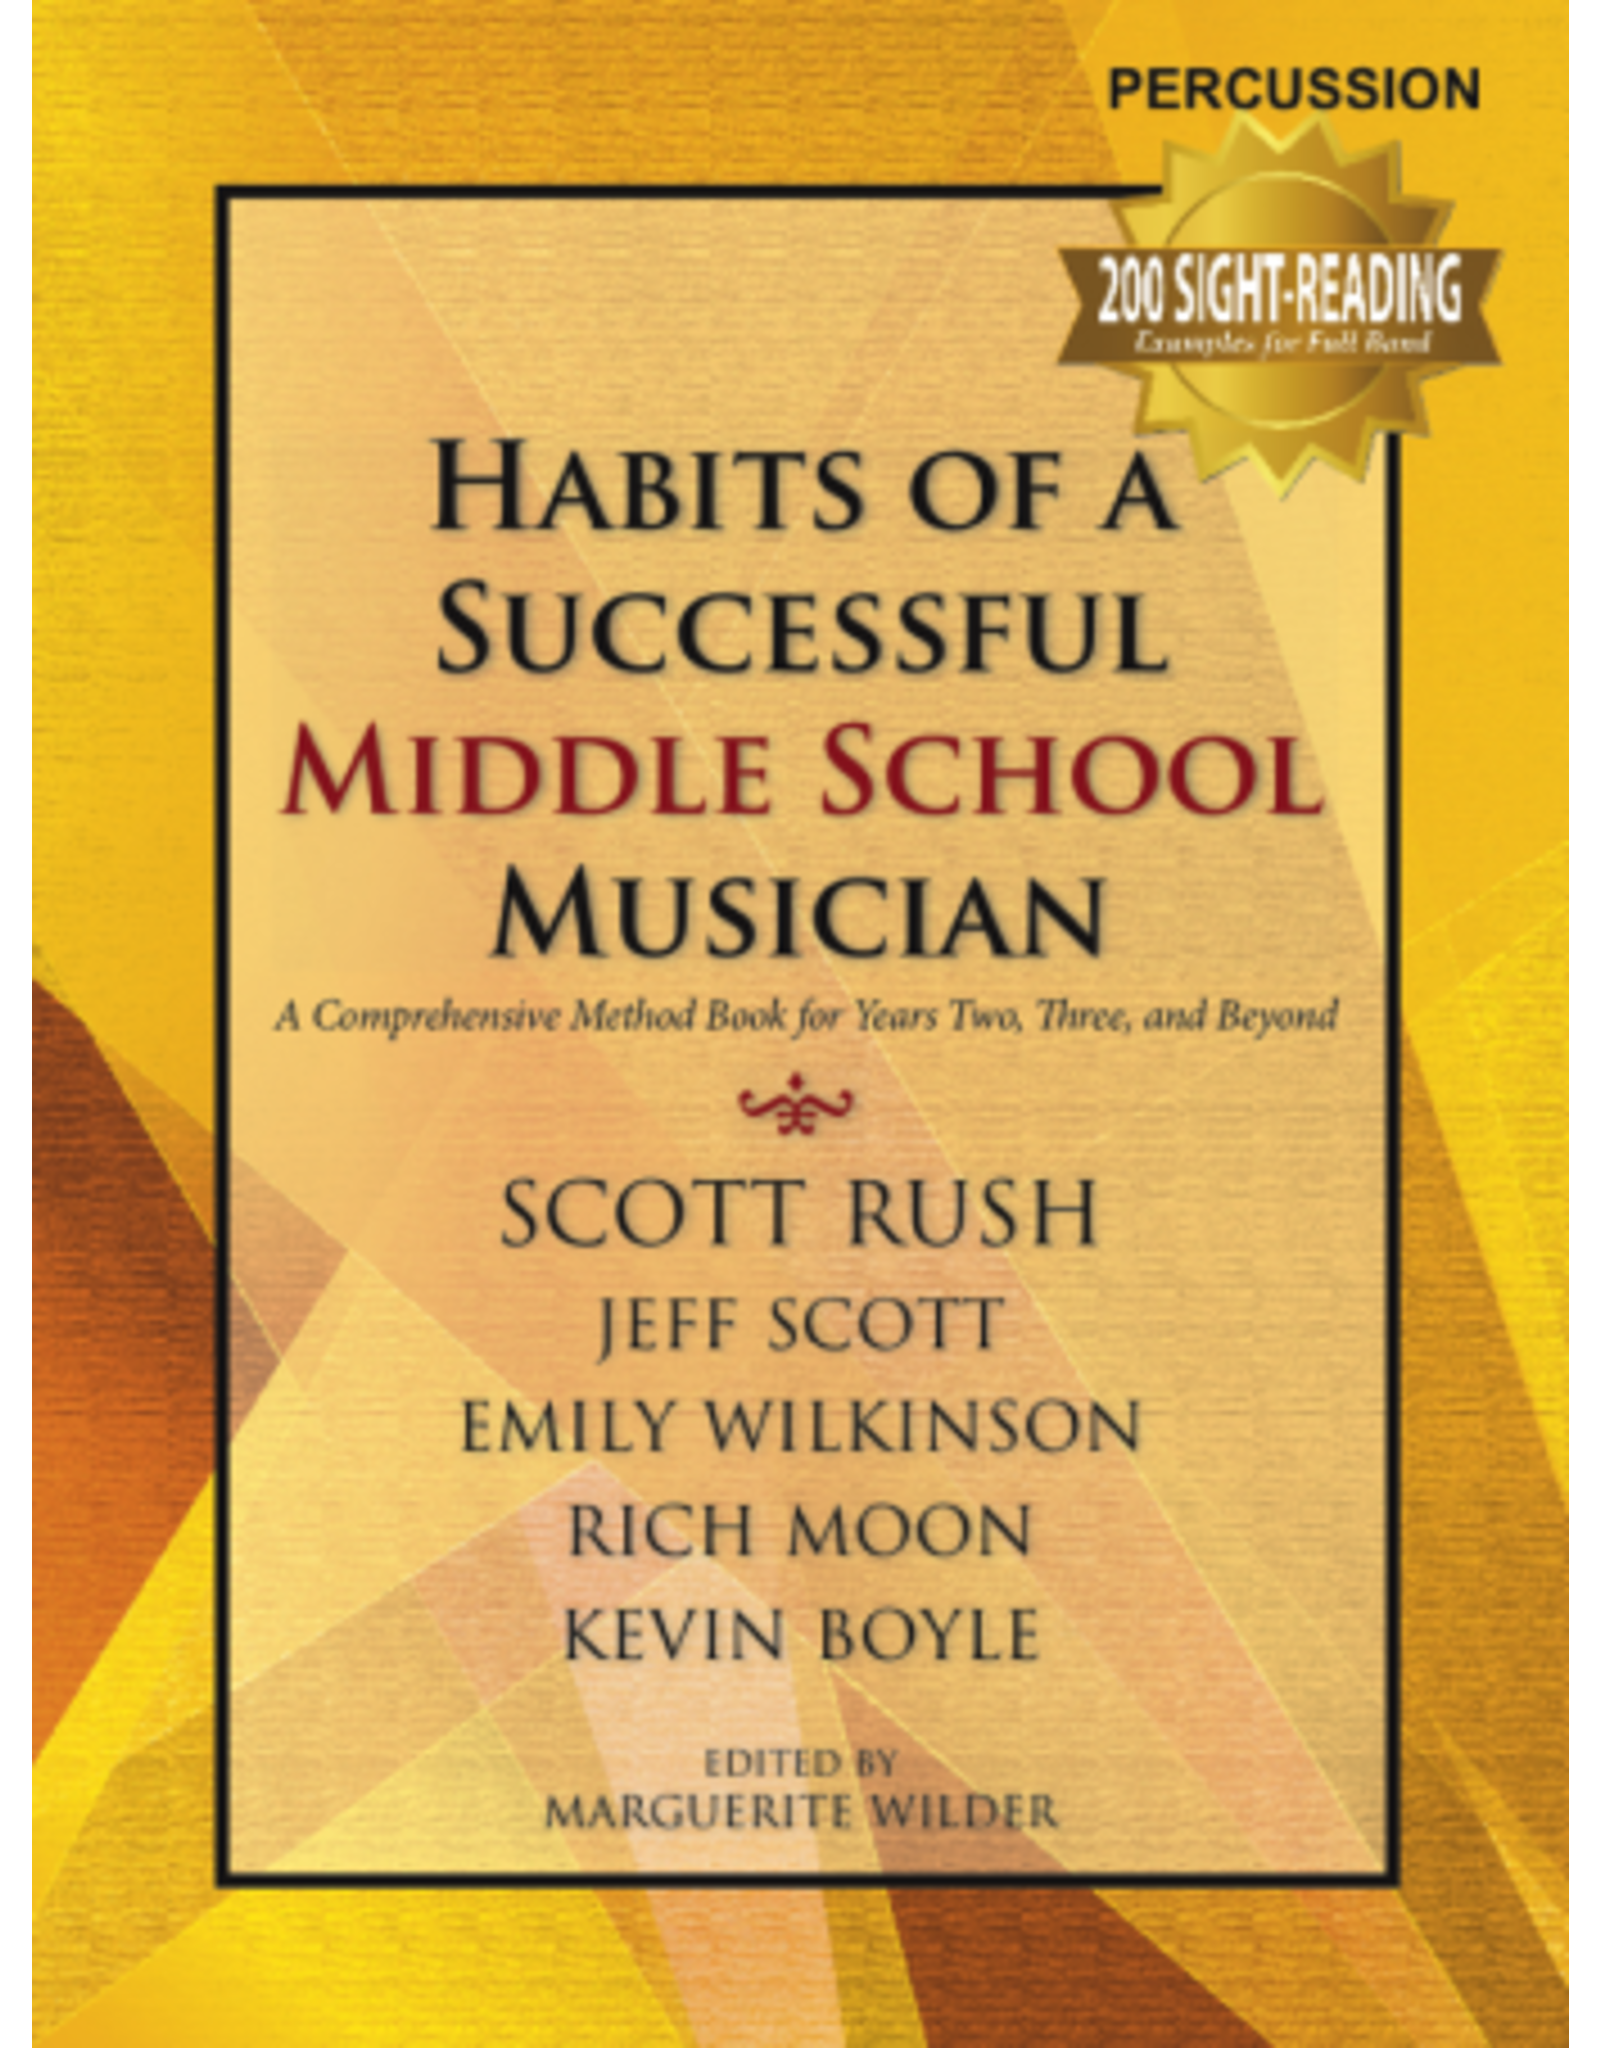 GIA Publications Habits of a Successful Middle School Musician-Percussion